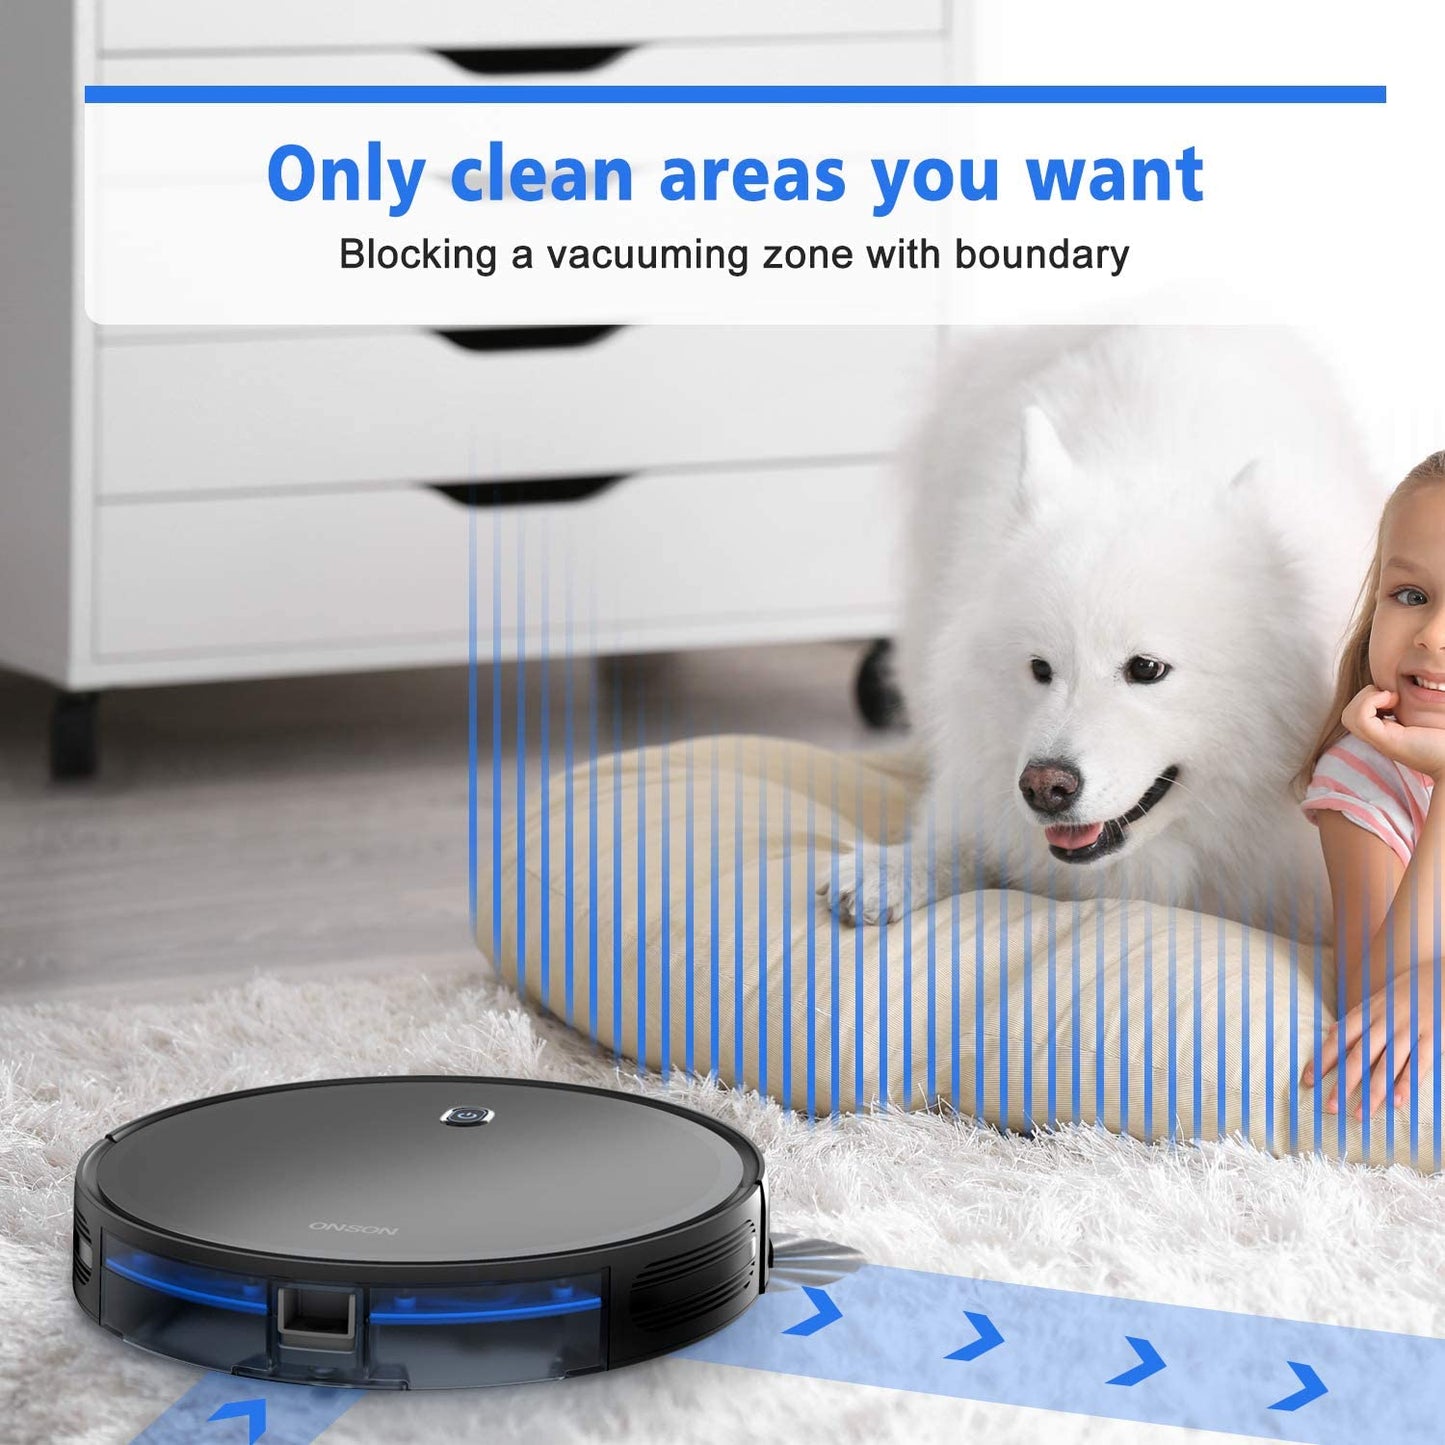 ONSON Intelligent Sweeper Remote Control Smart Home Vacuum Cleaner baby magazin 